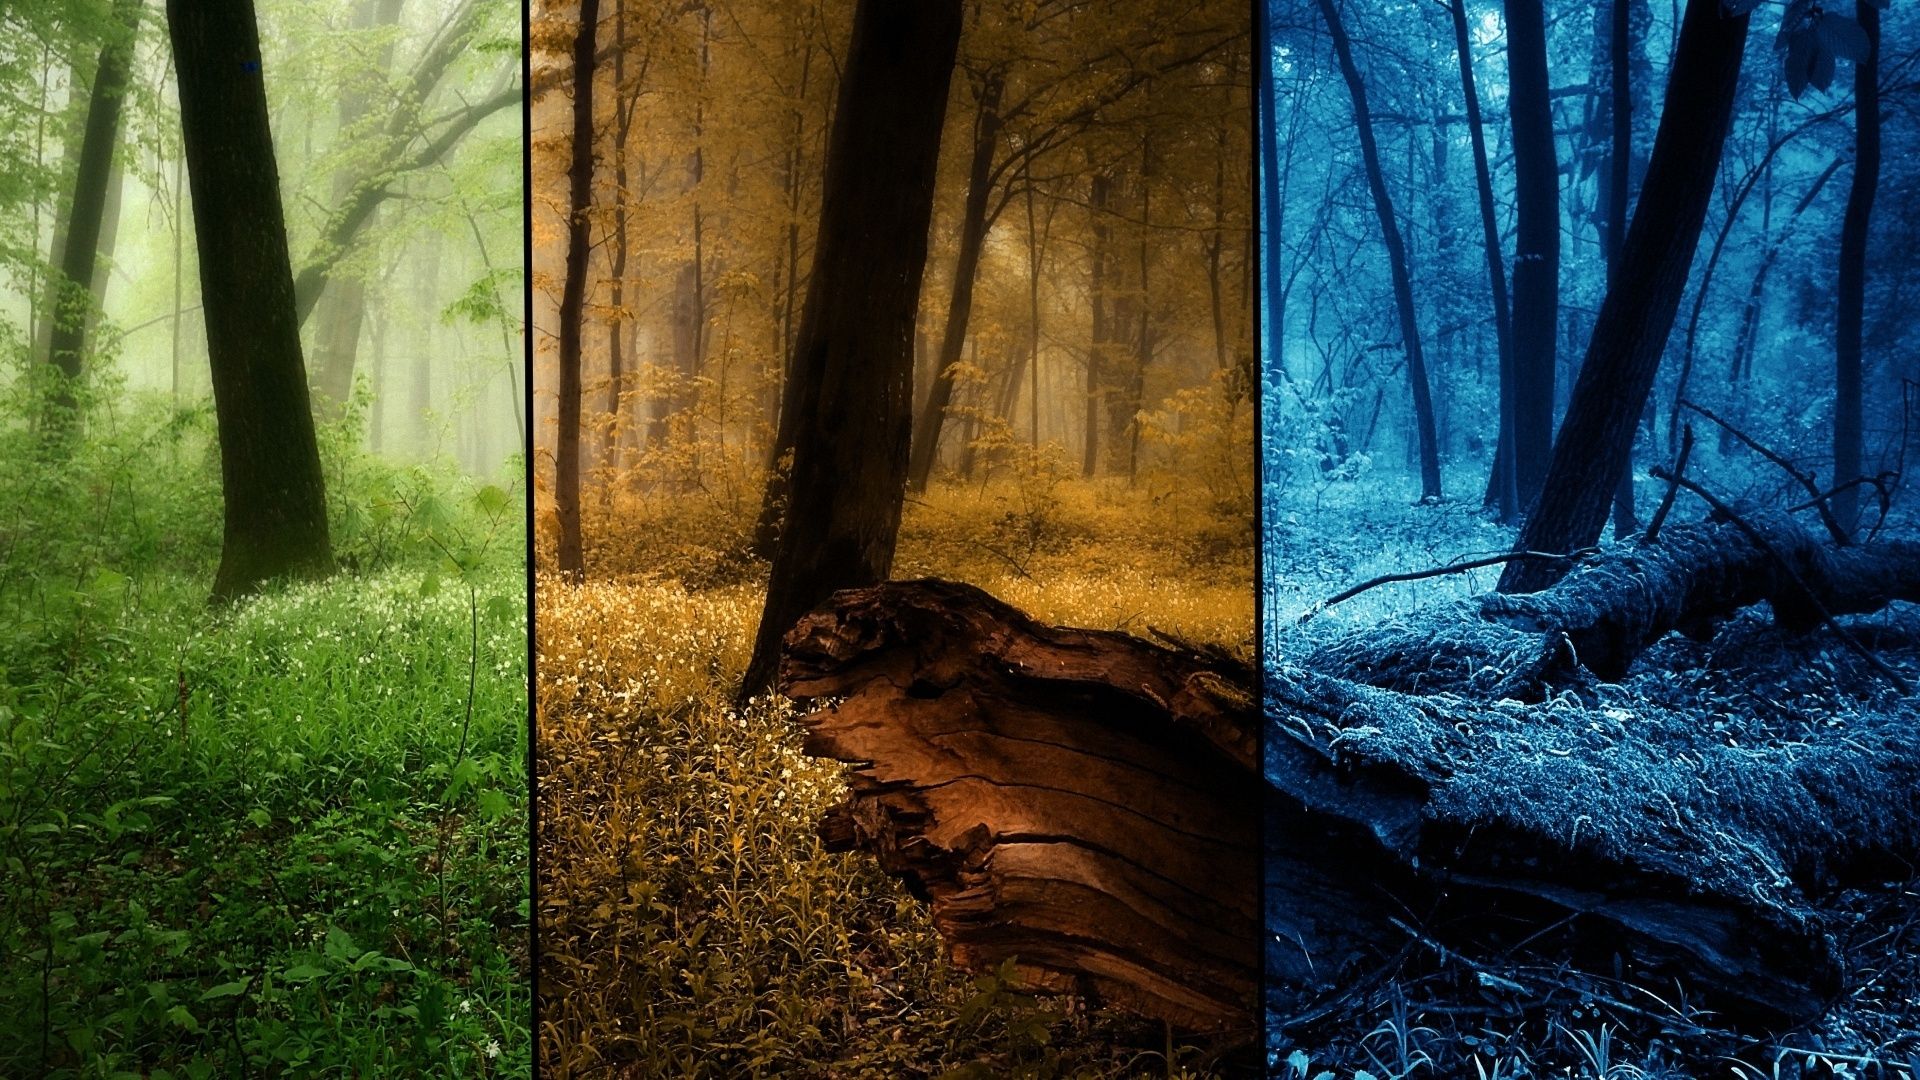 Download Wallpaper 1920x1080 wood, seasons, picture, trees, summer, autumn, winter Full HD 1080p HD Background